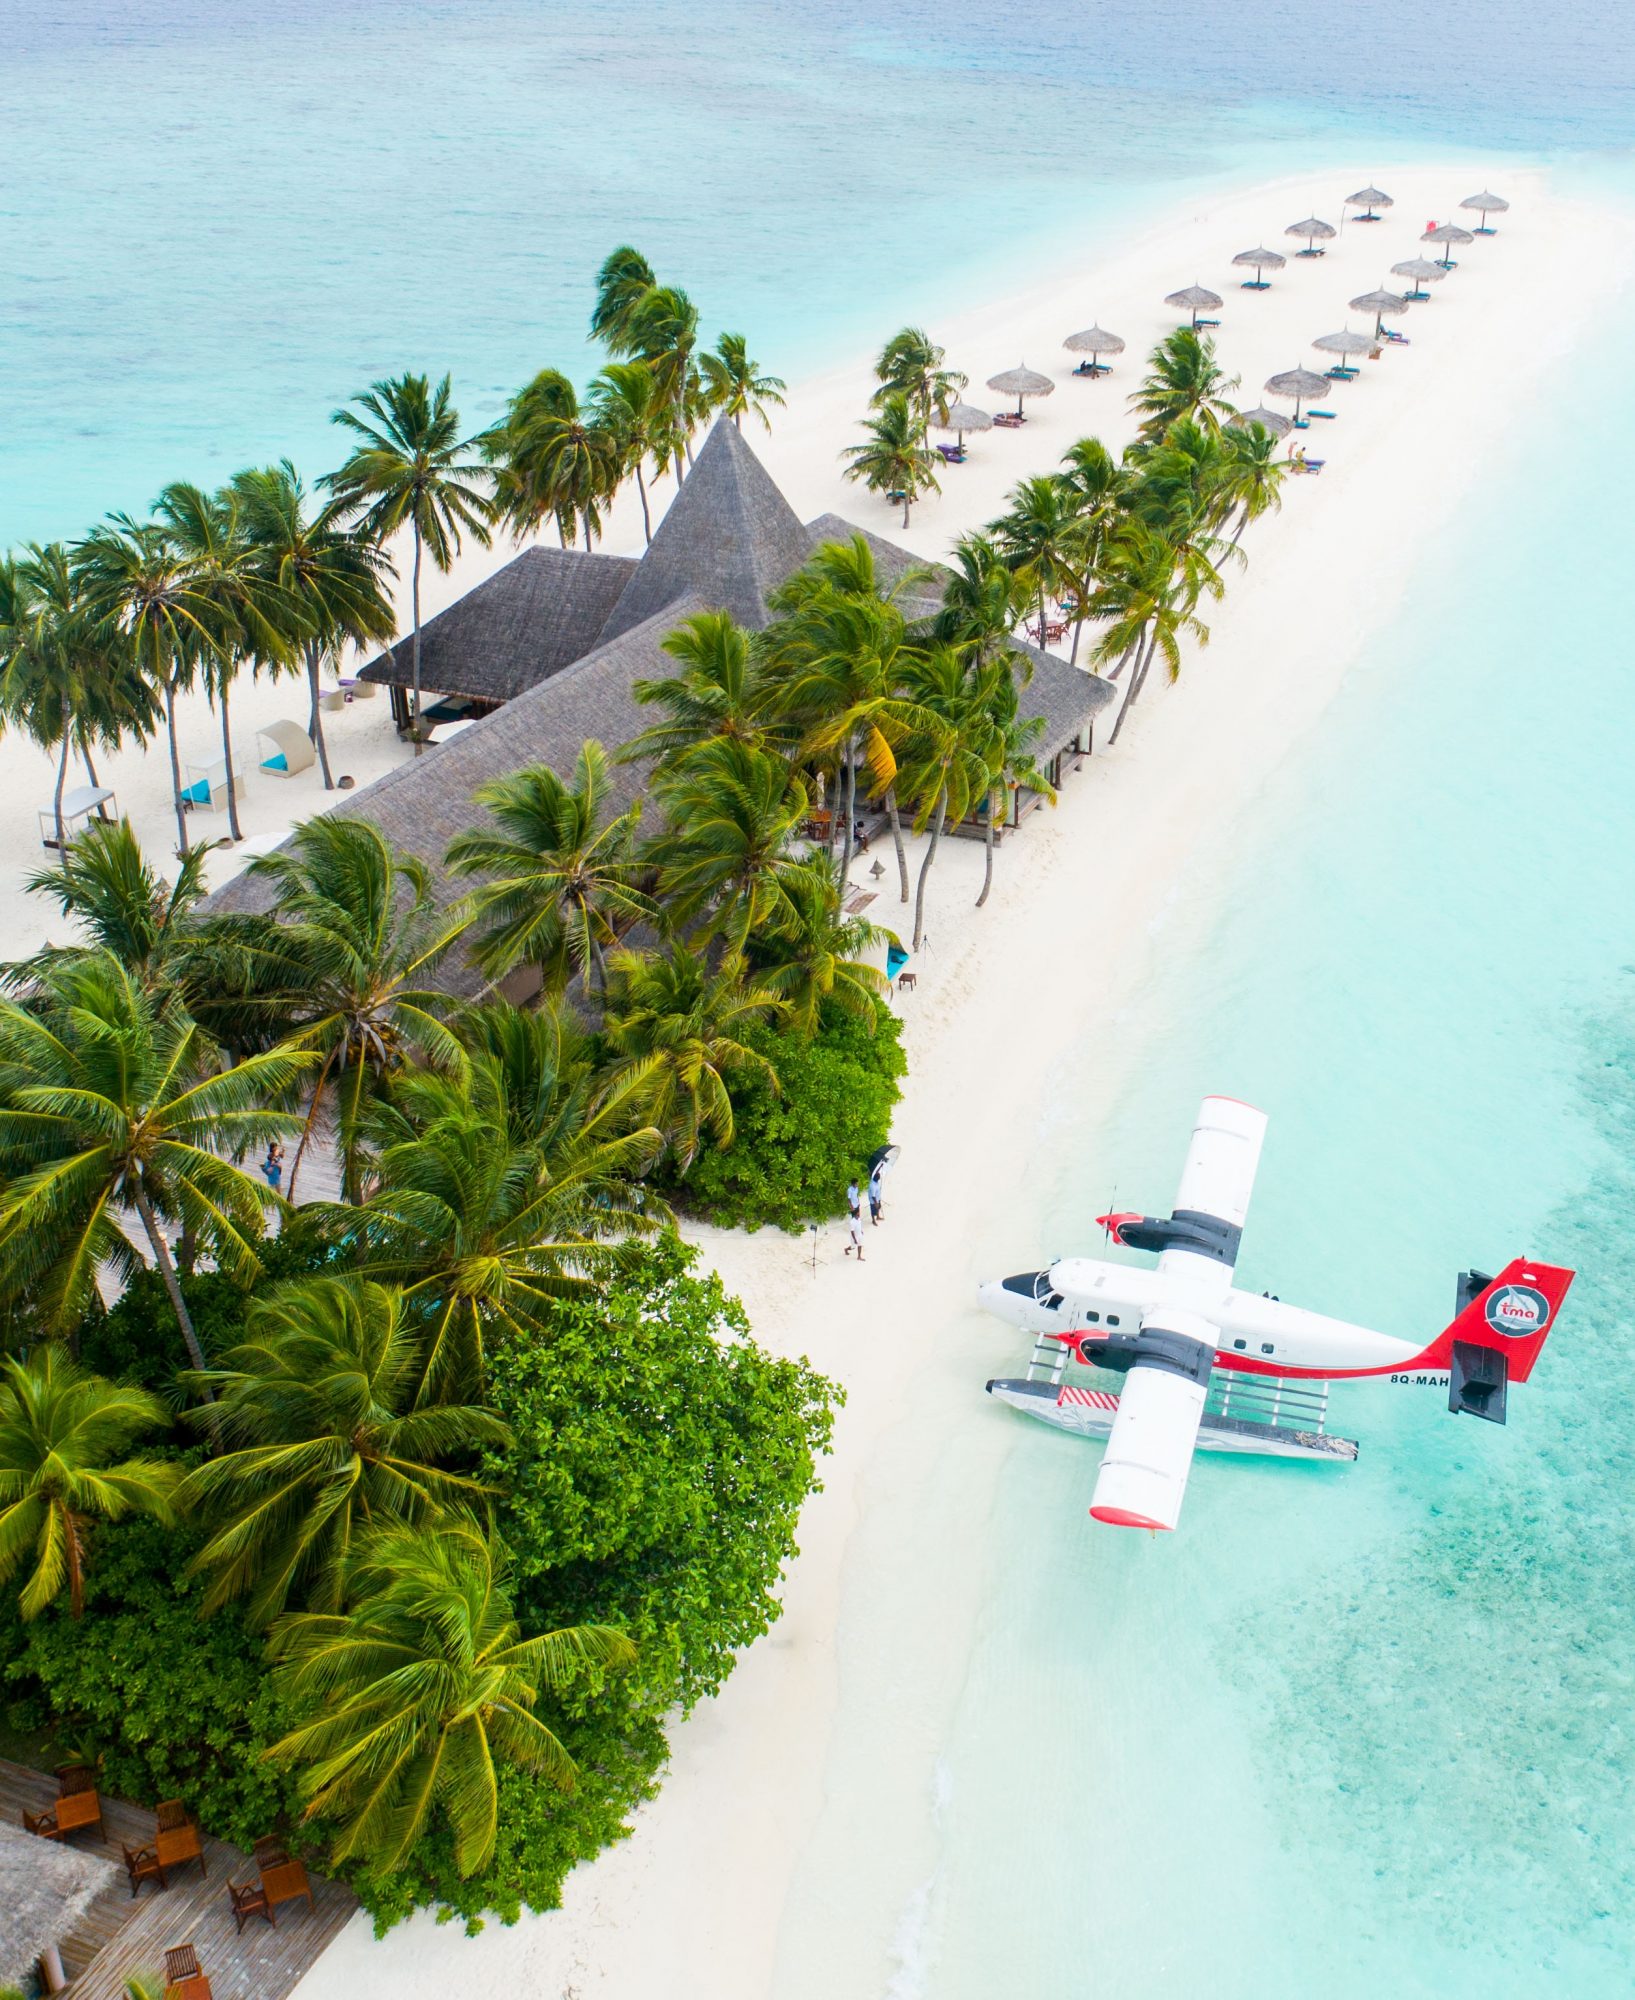 Aerial view of a seaplane parked at a resort on a Maldives island on SelfishMe Travel LLC